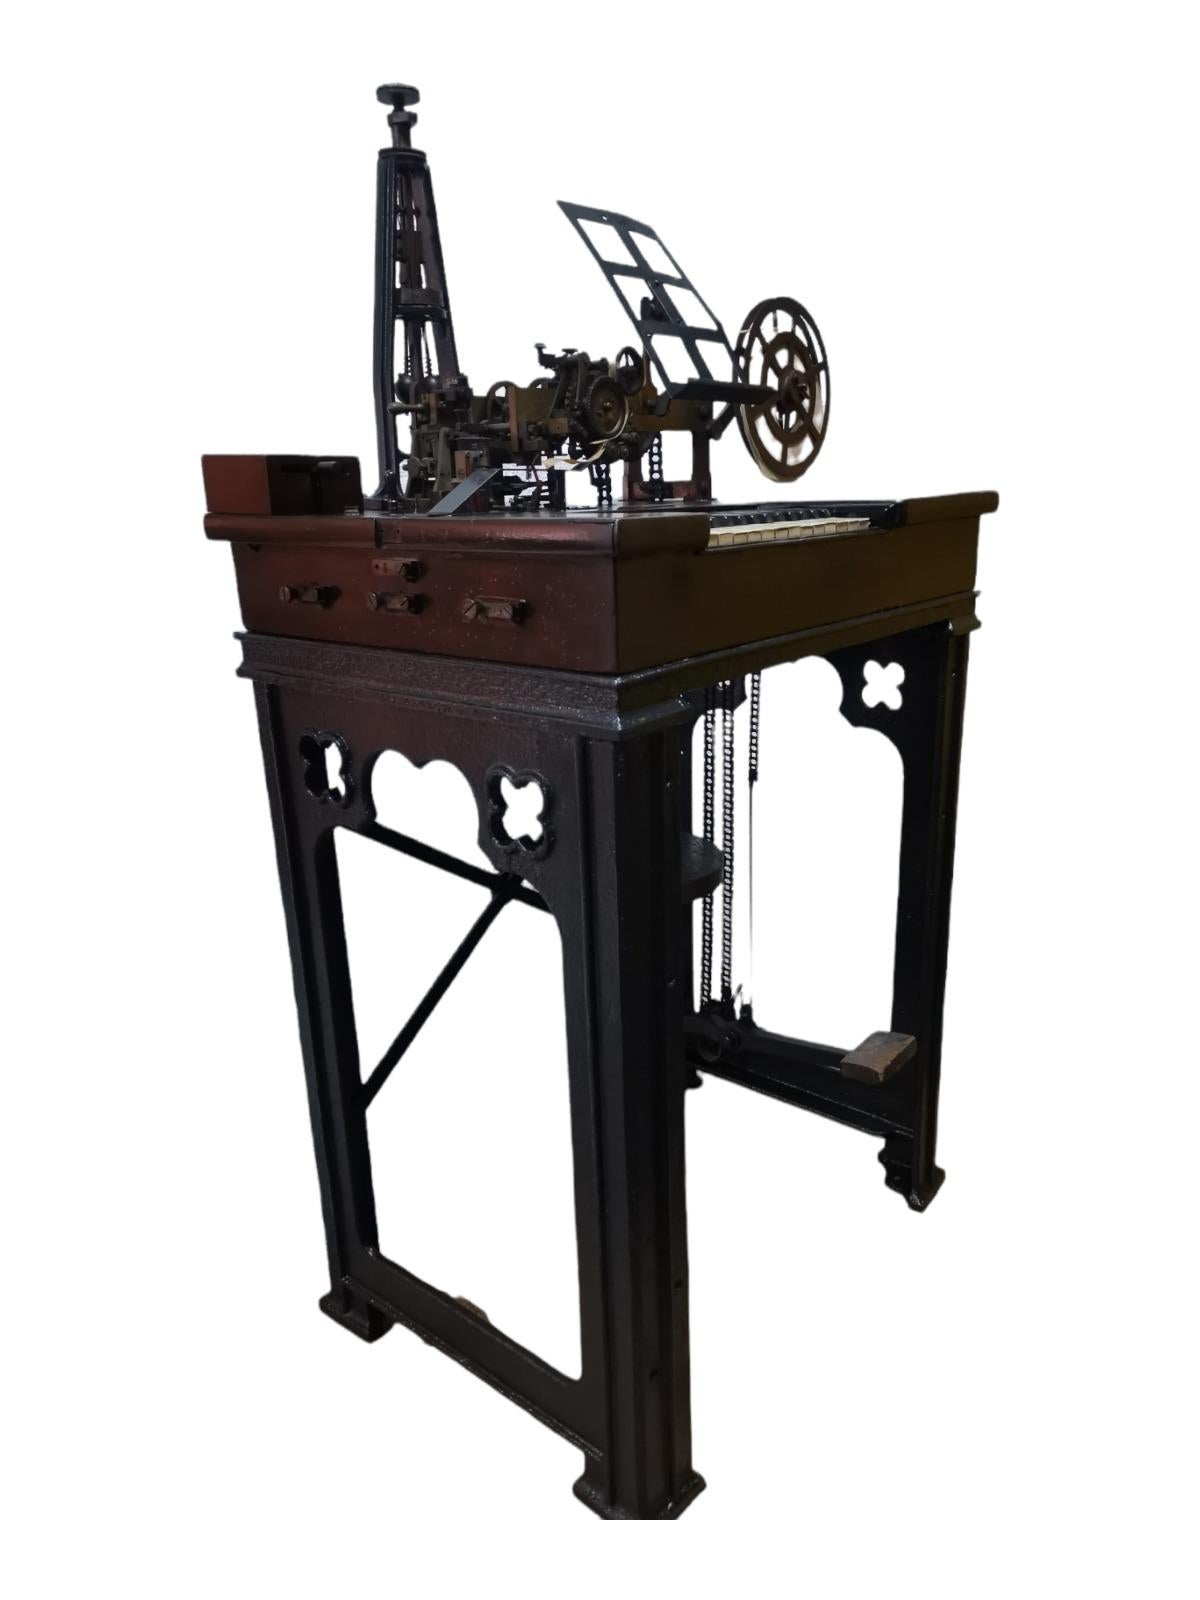 Hughes typewriting telegraph .A Printing Telegraph Set built by Siemens & Halske .This teletyper was invented by David Edward Hughes in 1856.Good condicion overall.Similar telegraph can be find in Saint Petersburg Museum-Rusia,Getty Museum